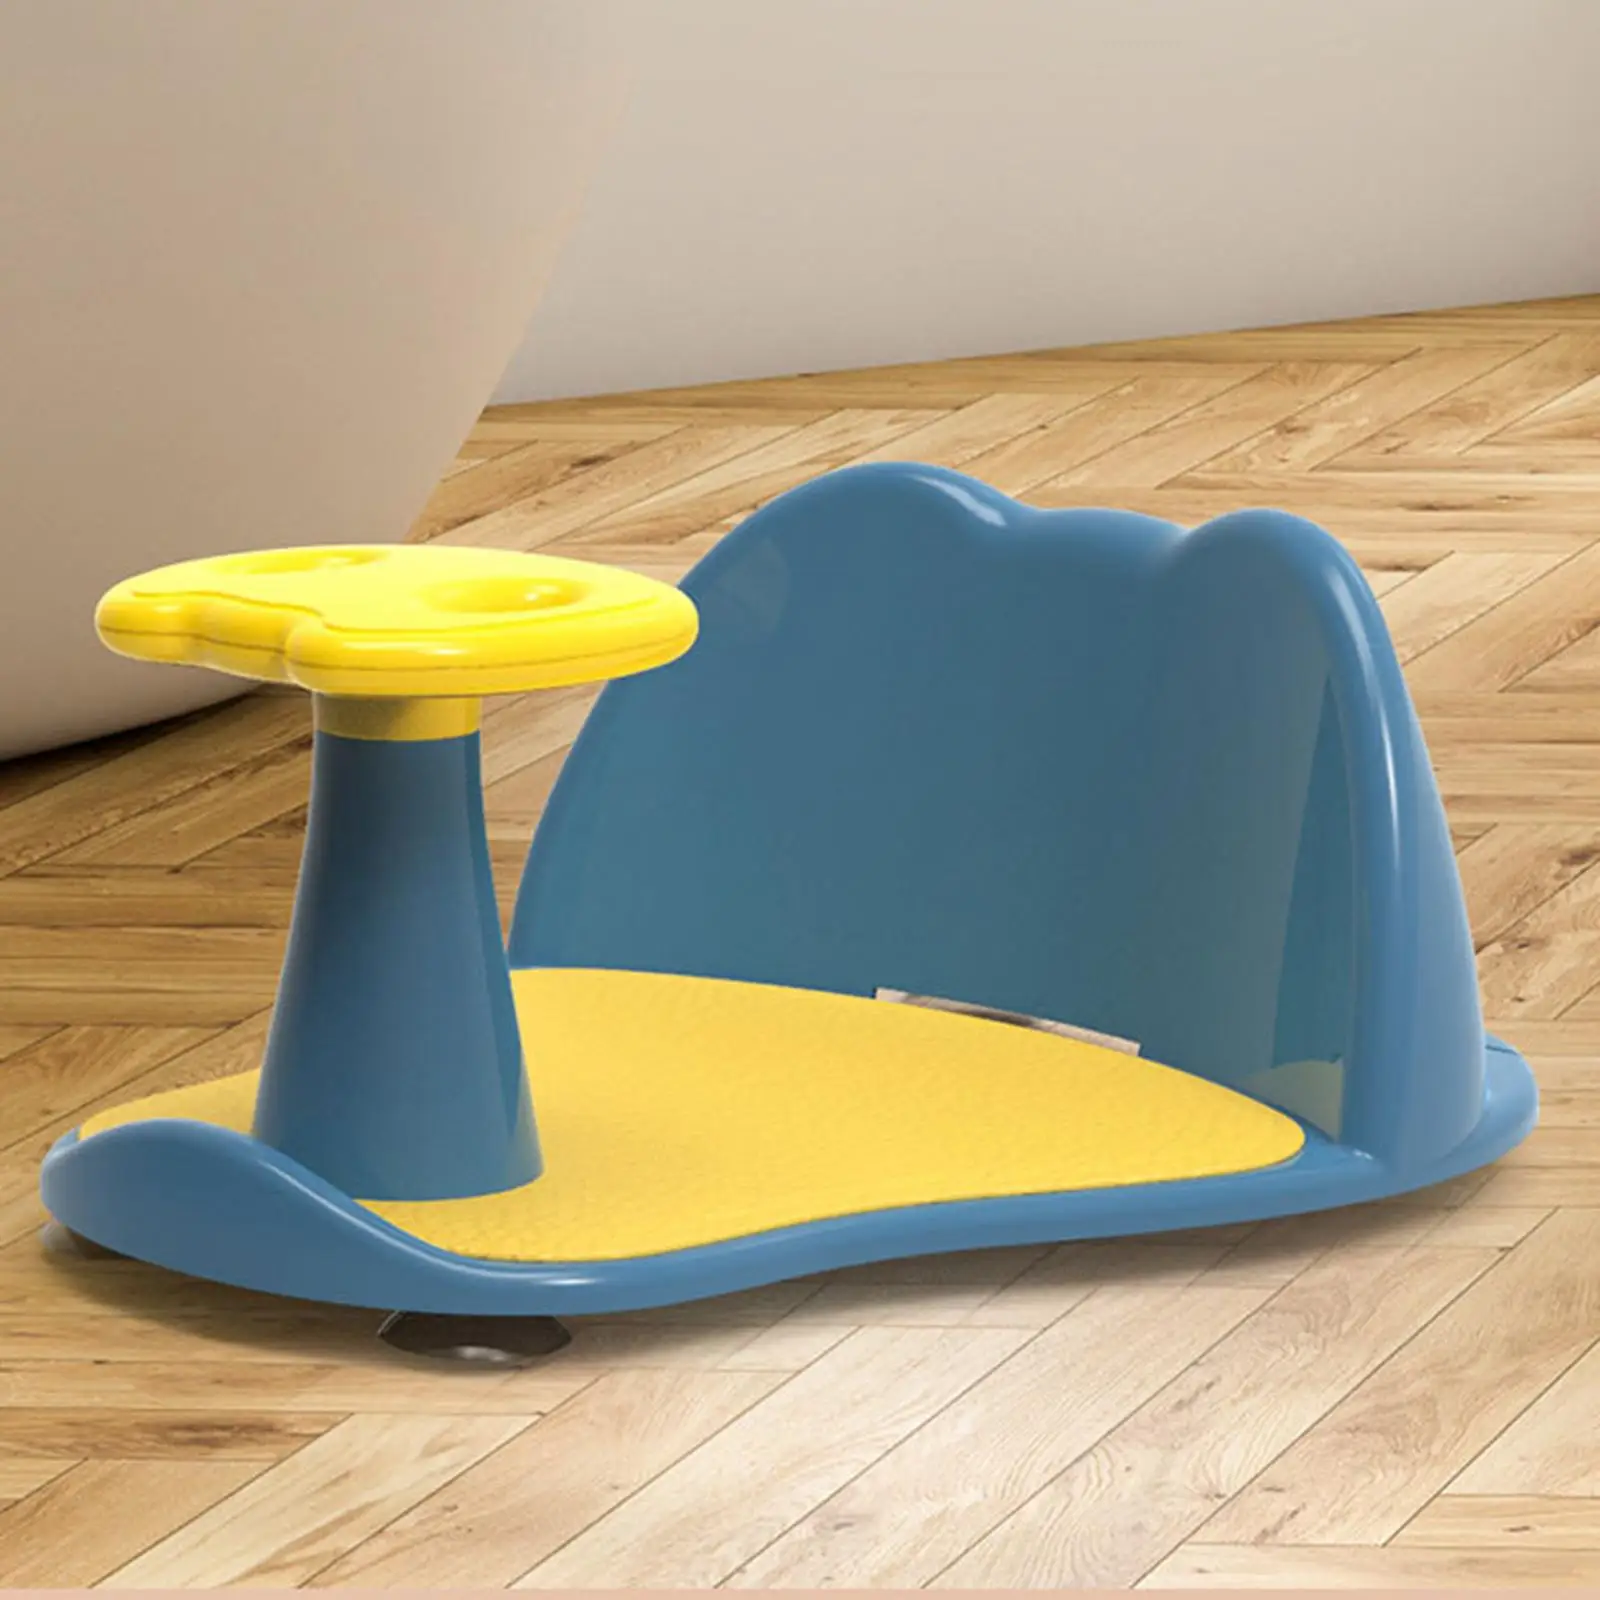 Contoured Seat Open-Side Drain Holes Seat Tub Bathtub Seat for Babies Sit-Up Bathing in the Sink Counter